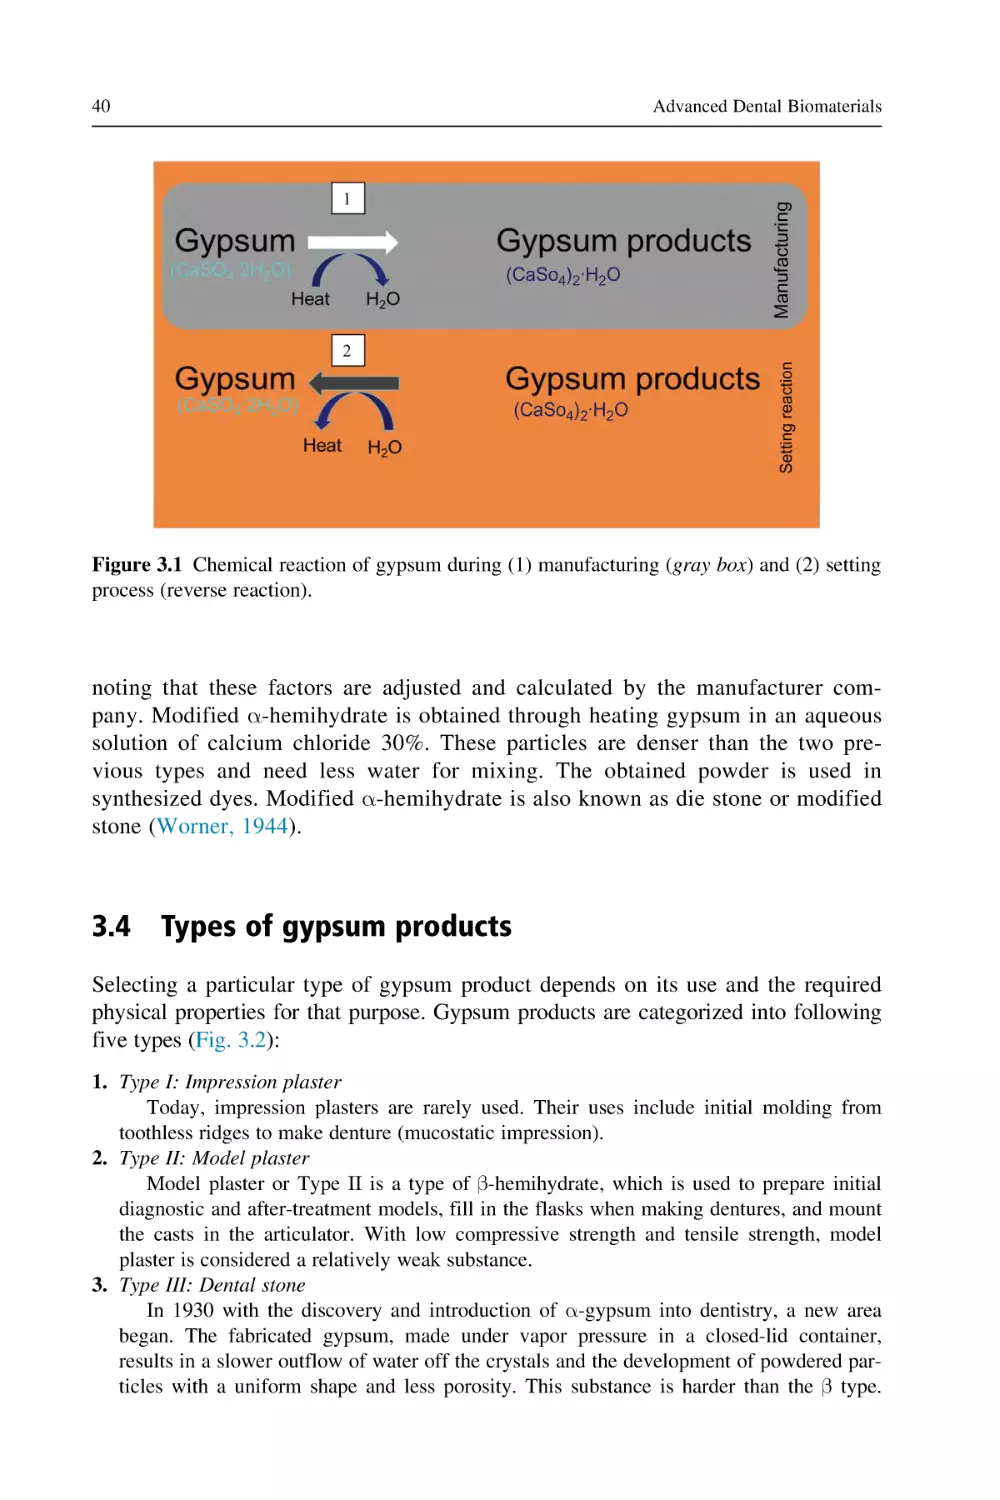 3.4 Types of gypsum products